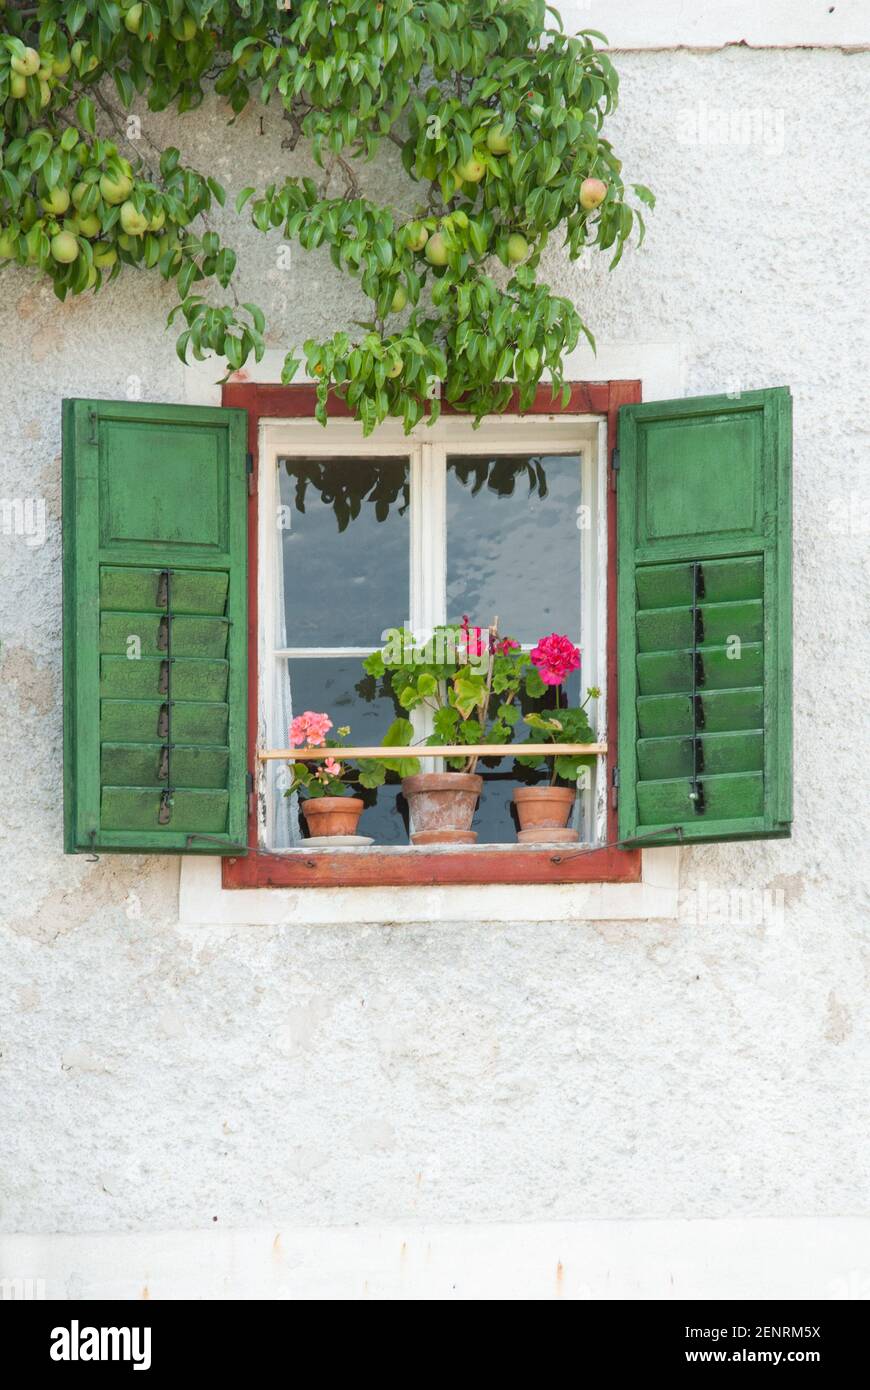 pelargonium in window with green shutters at old alpine house with espalier pear tree on front, Salzkammergut, Austria Stock Photo